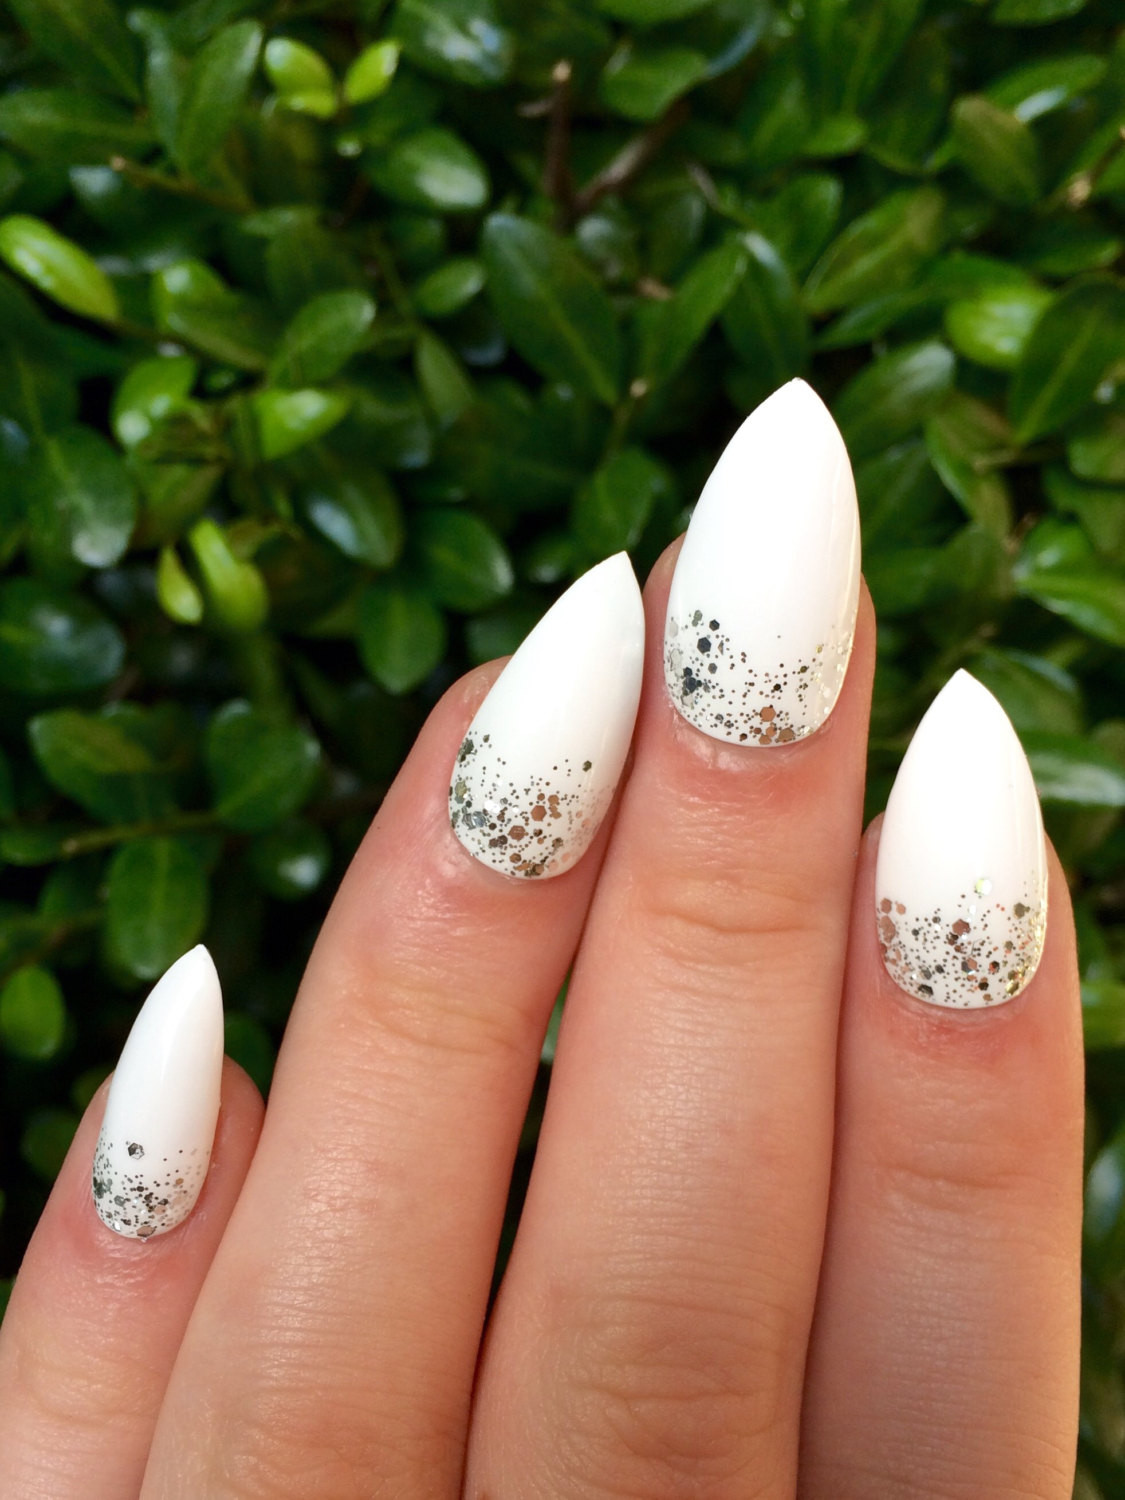 White Acrylic Nails With Glitter
 Top 55 Beautiful White Acrylic Nails